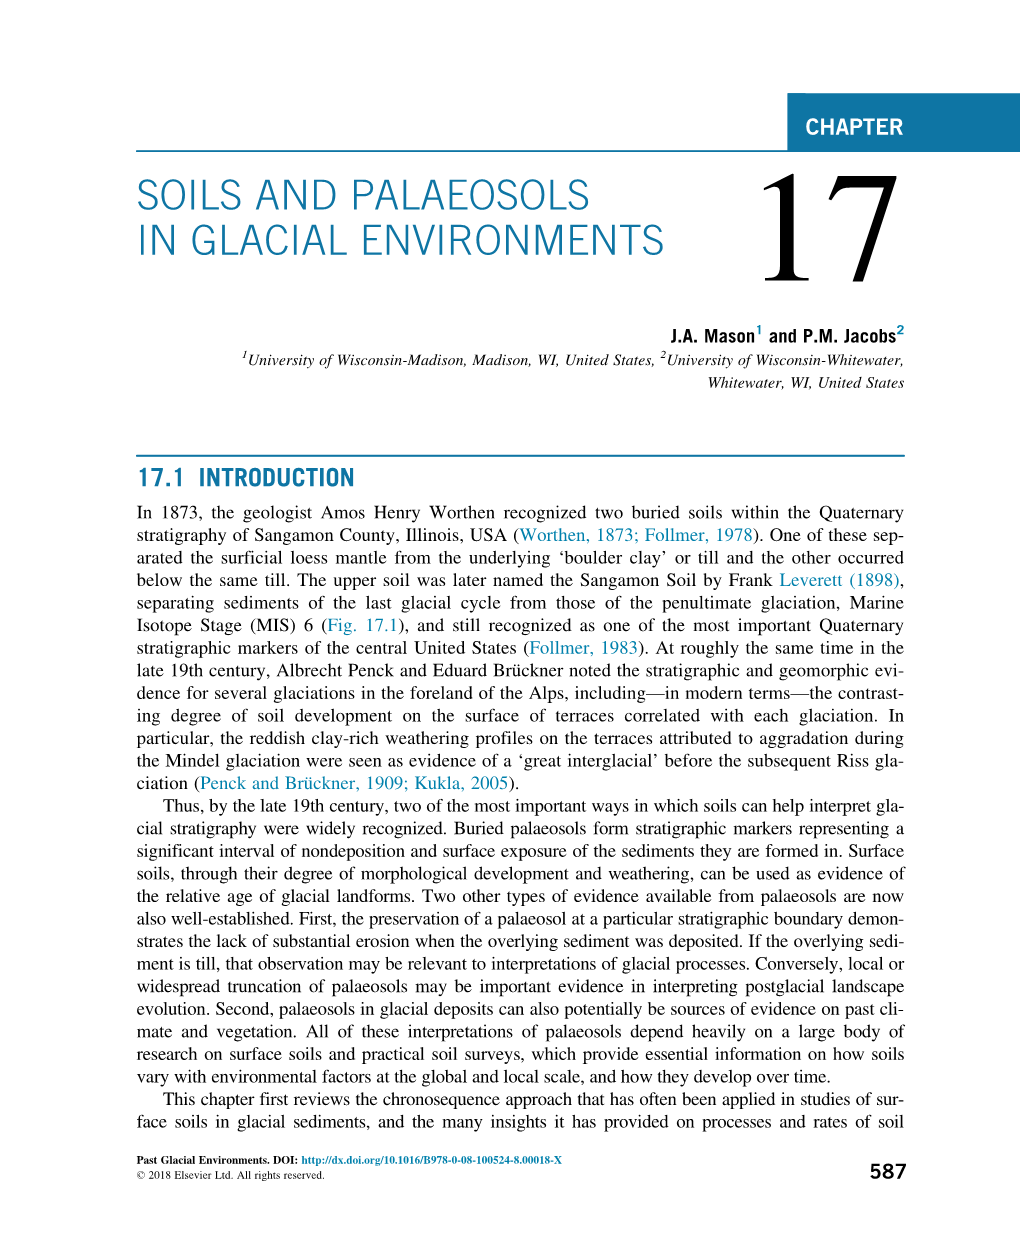 Chapter 17. Soils and Palaeosols in Glacial Environments